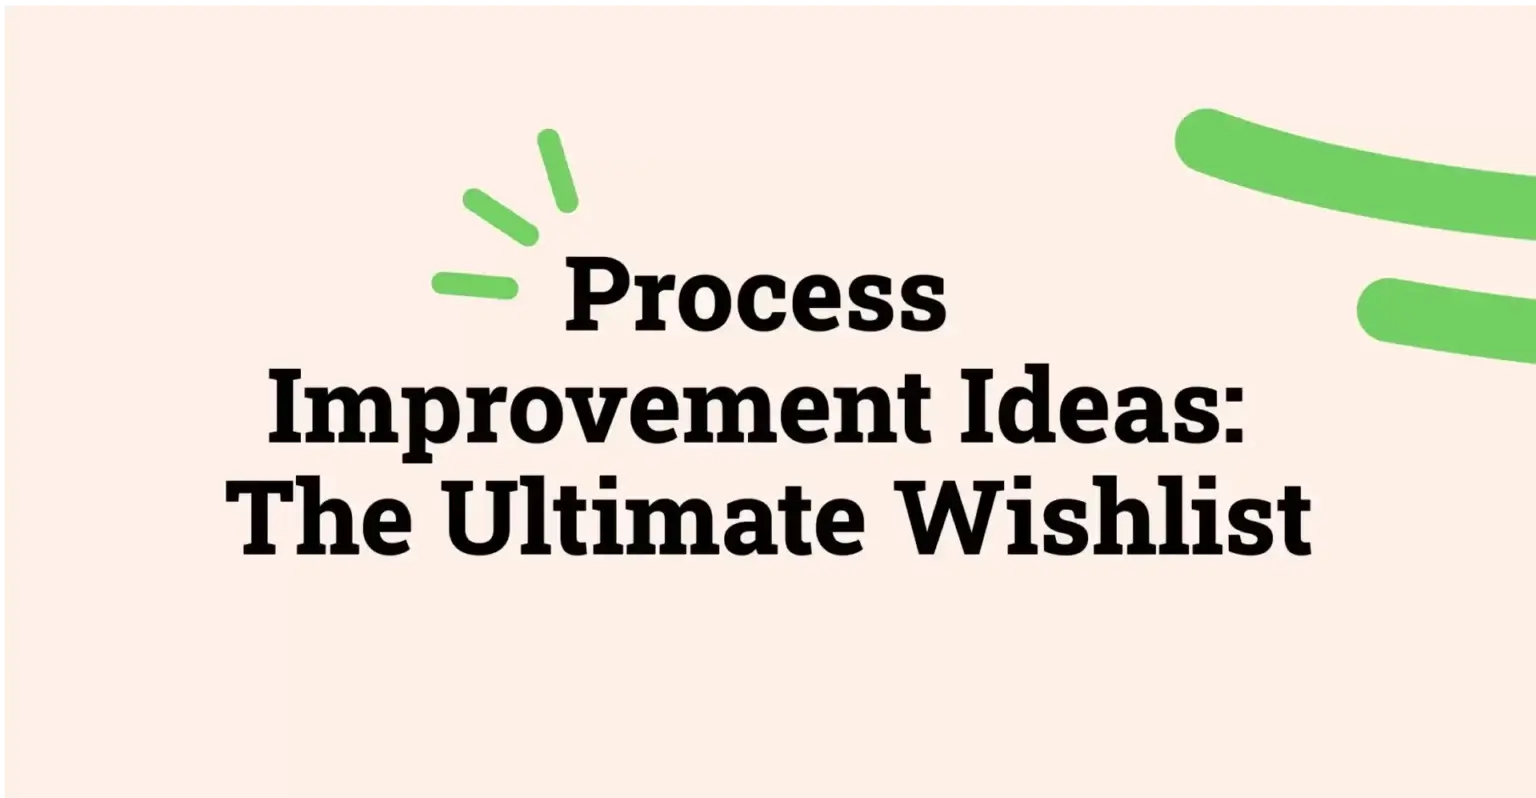 The ultimate wishlist for enhancing processes.